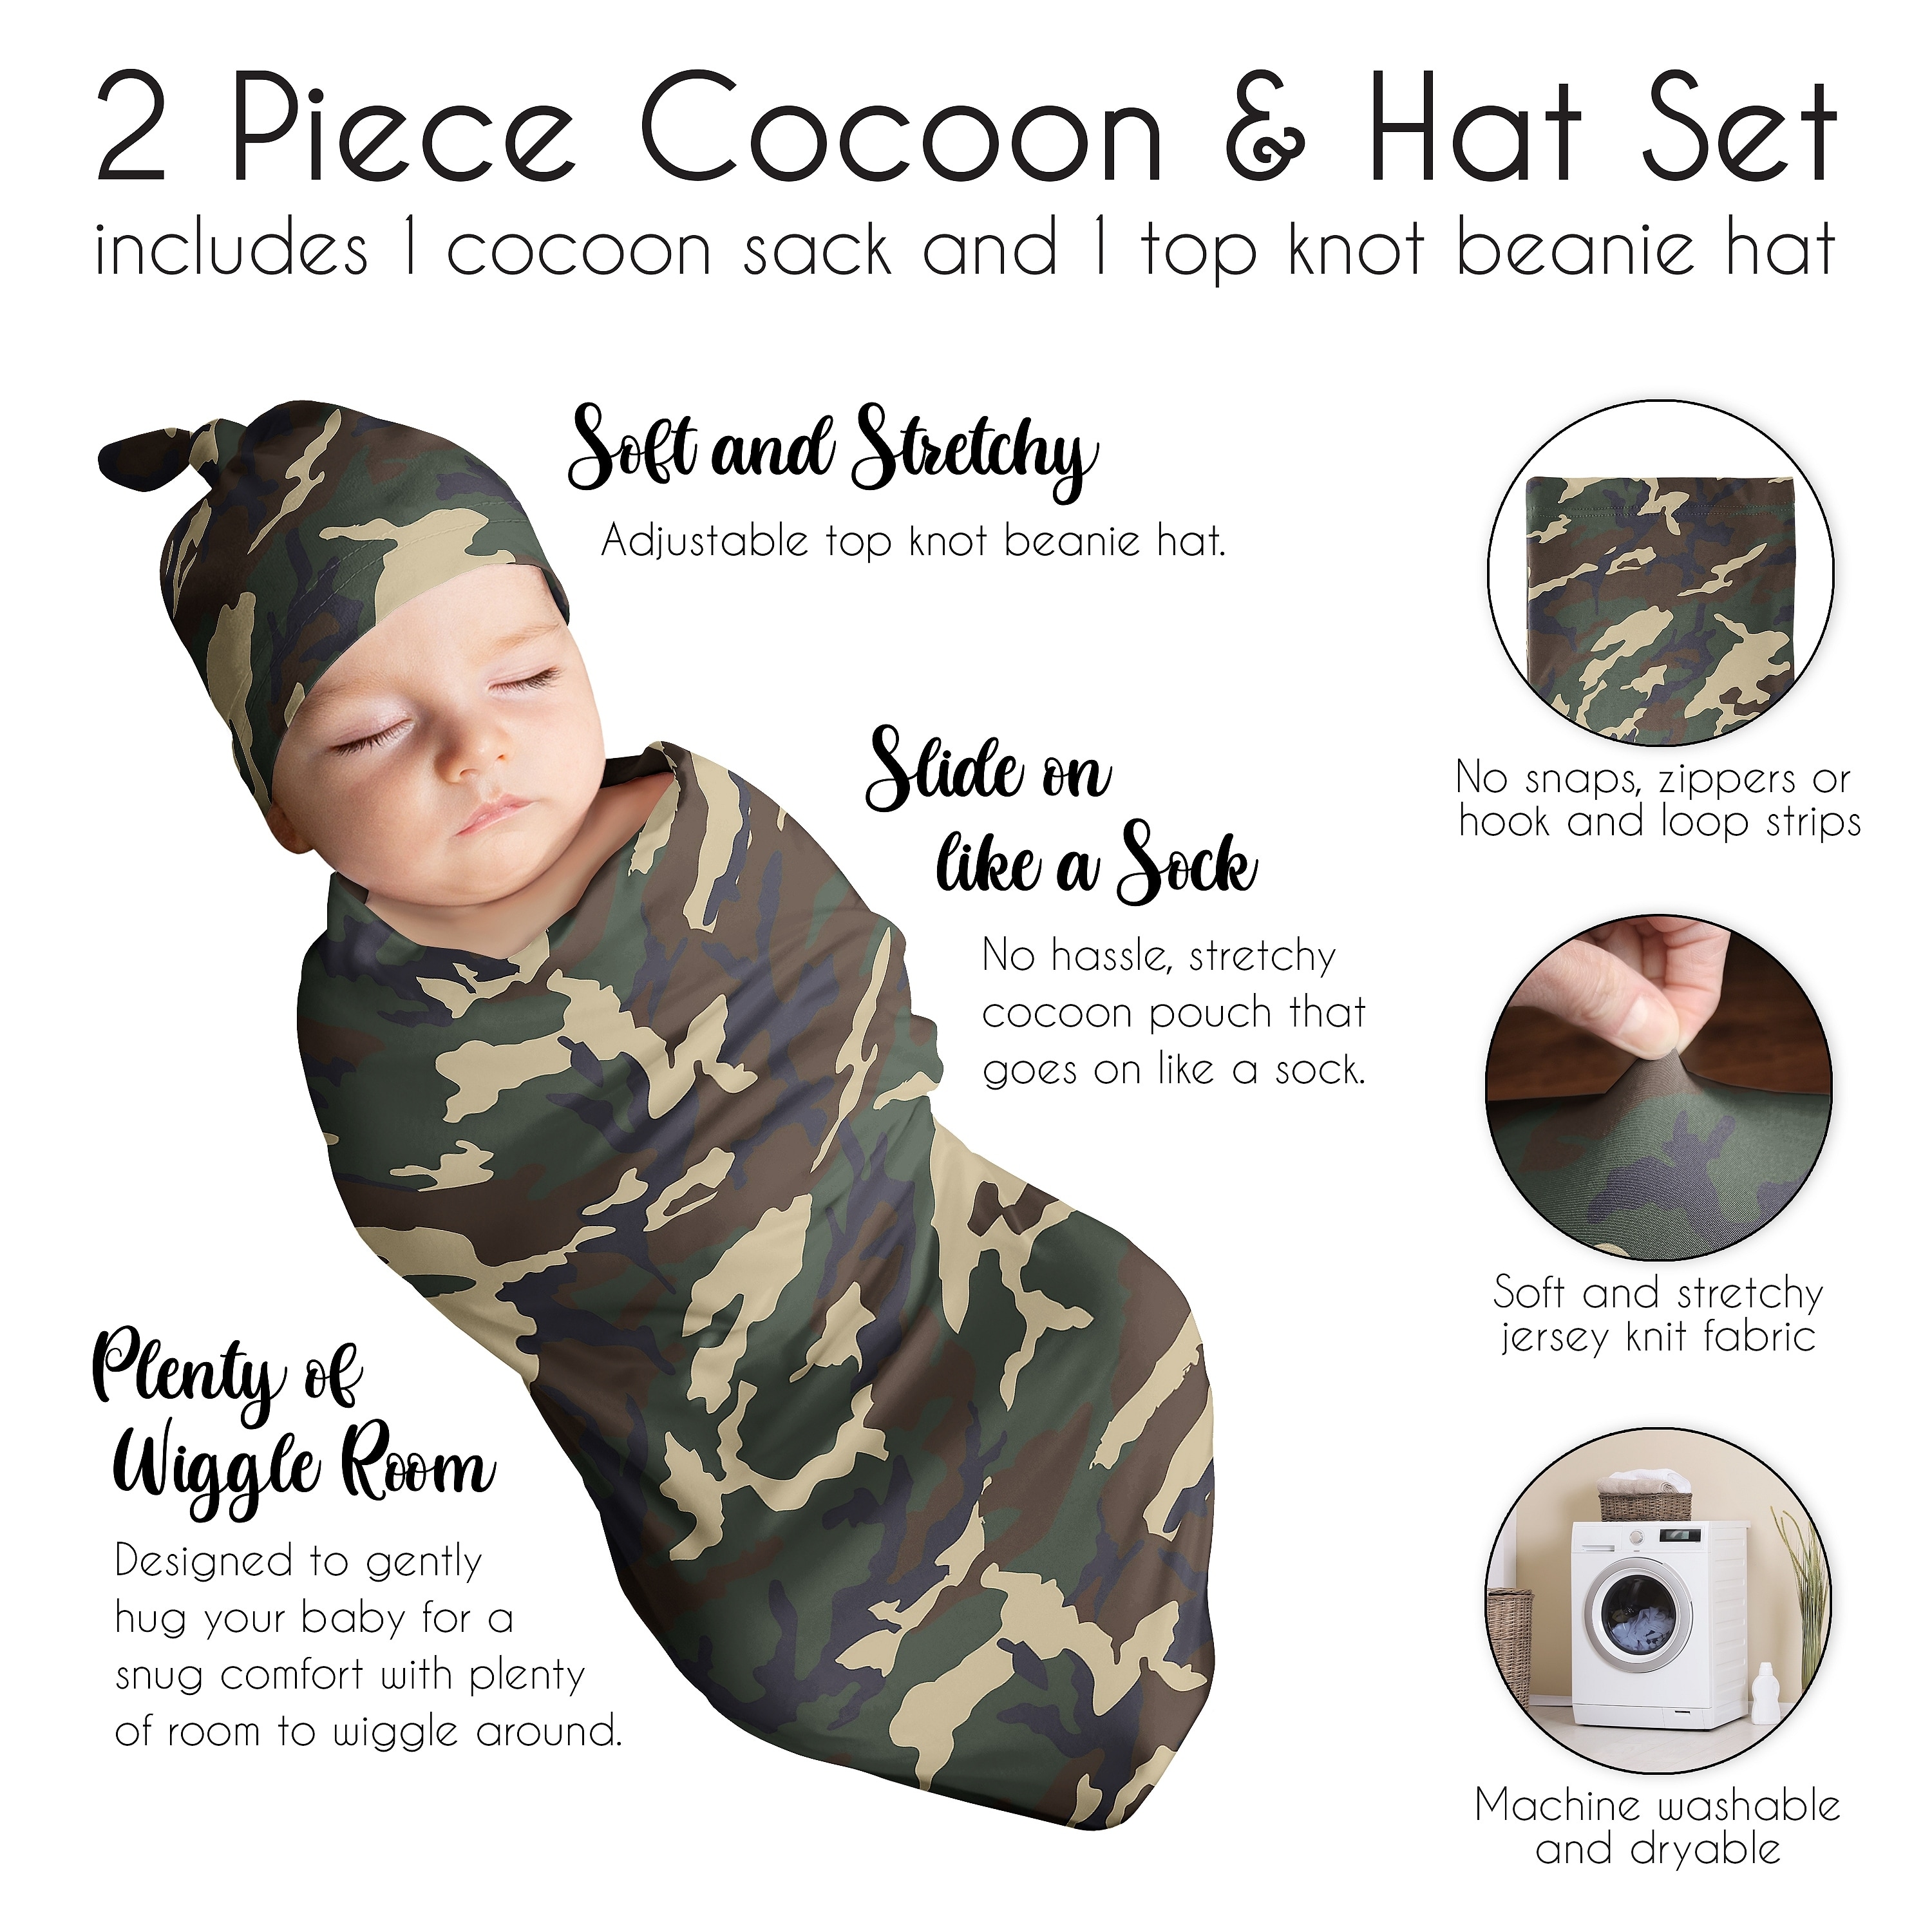 Woodland Camo Collection Boy Baby Cocoon and Beanie Hat Sleep Sack - 2pc Set - Beige, Green and Black Rustic Forest Camouflage